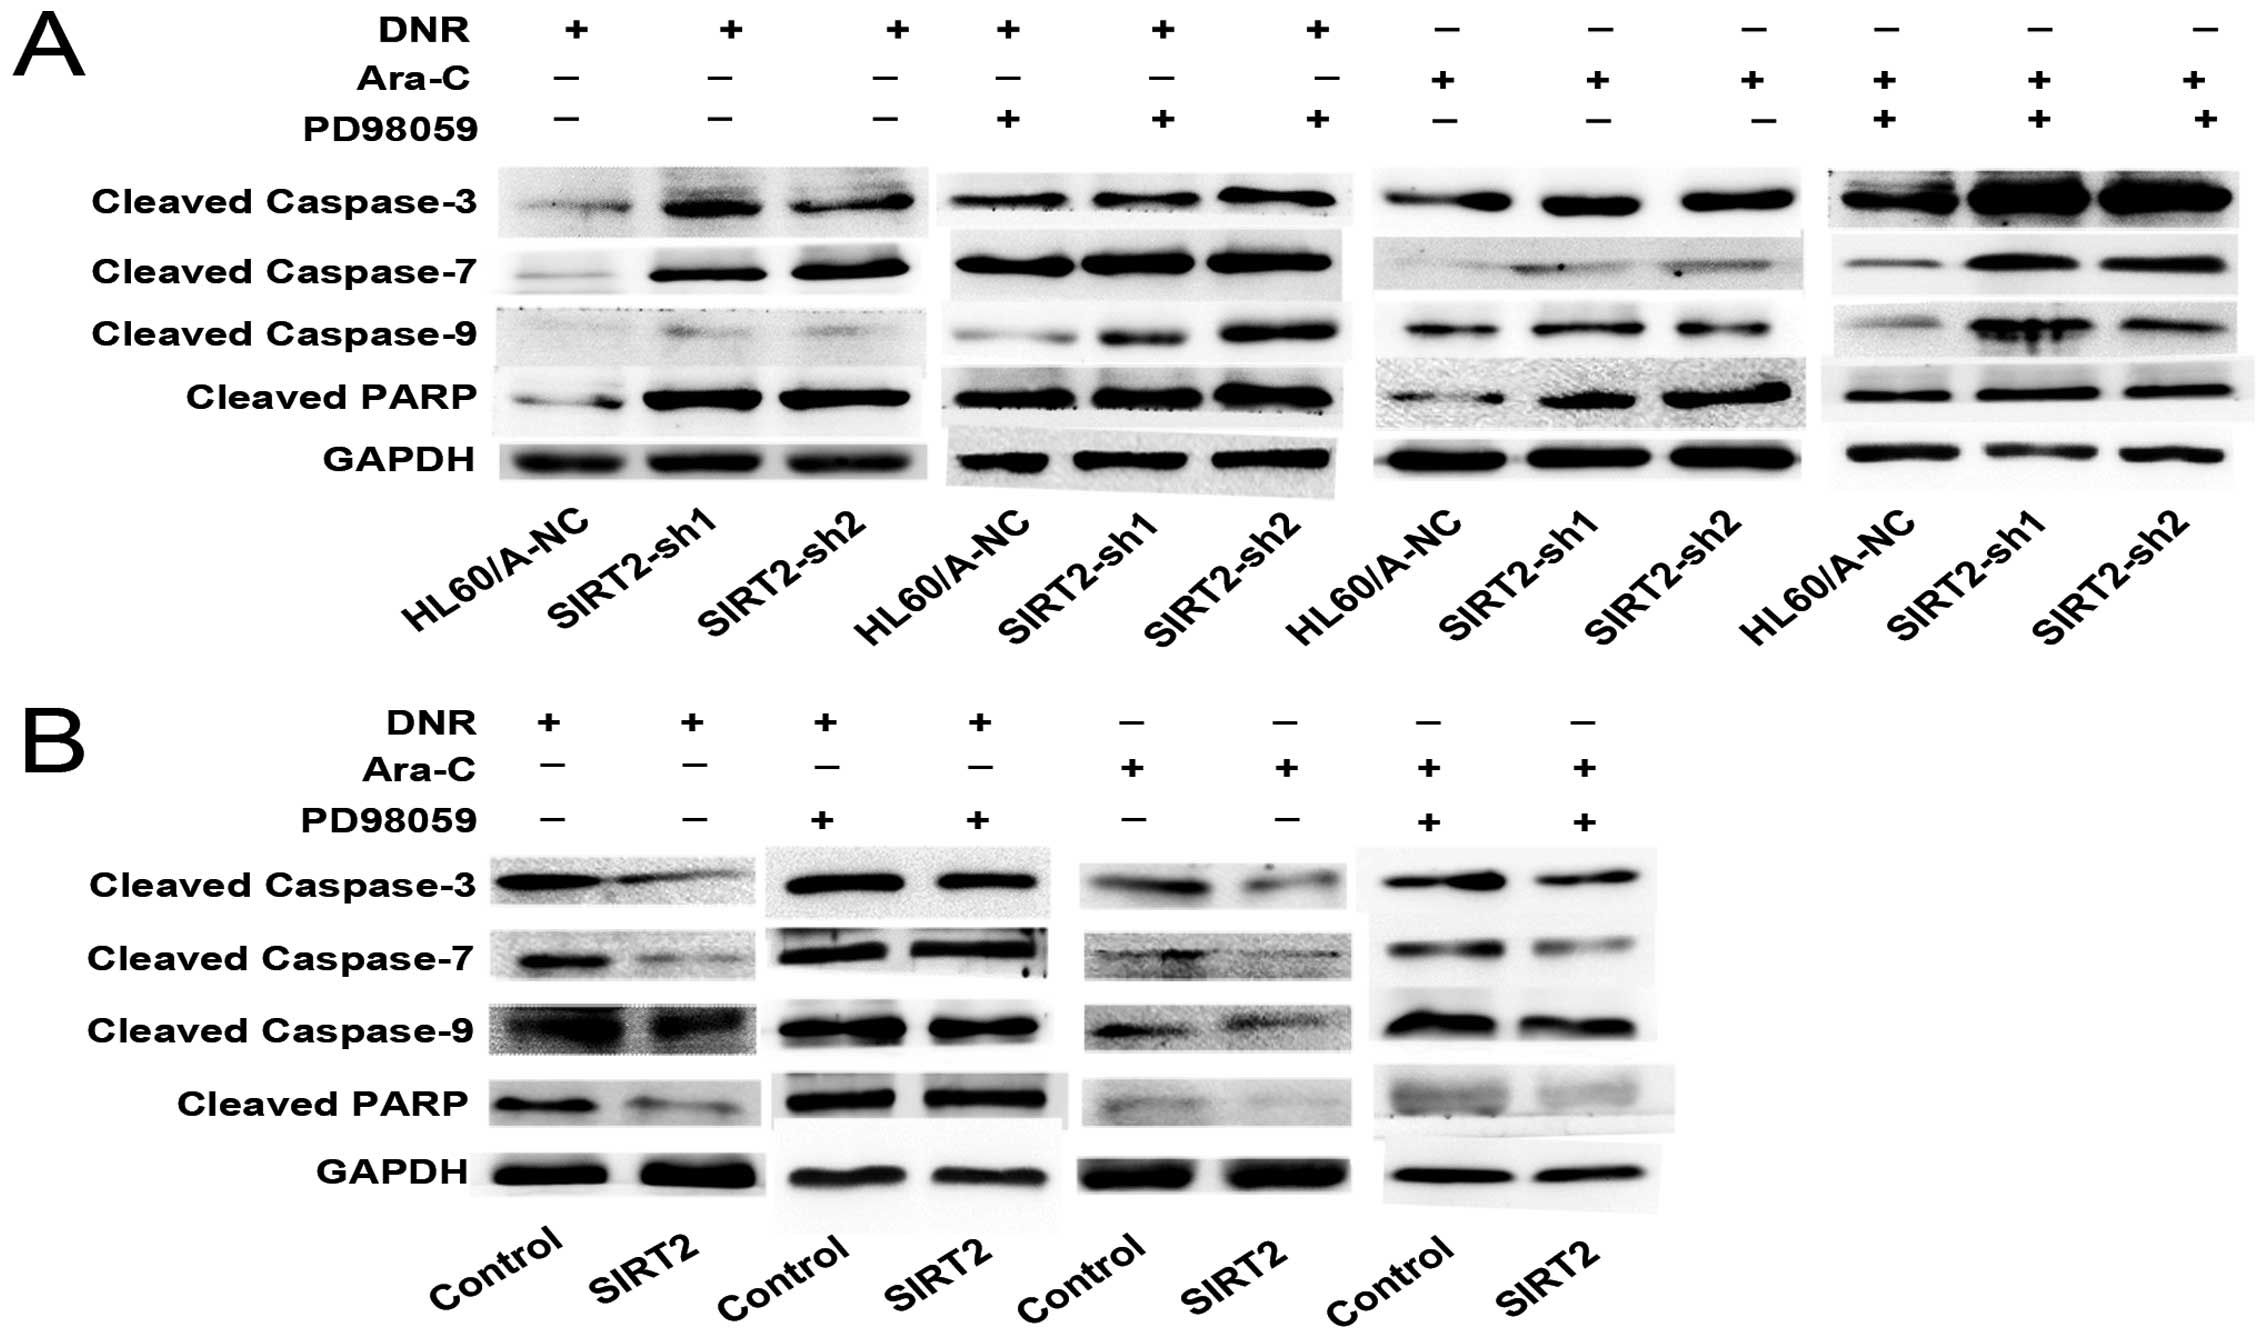 The expression of caspase family proteins in HL60 A and HL60 cells with DNR or Ara C and with or without PD A Cleaved caspase family proteins in